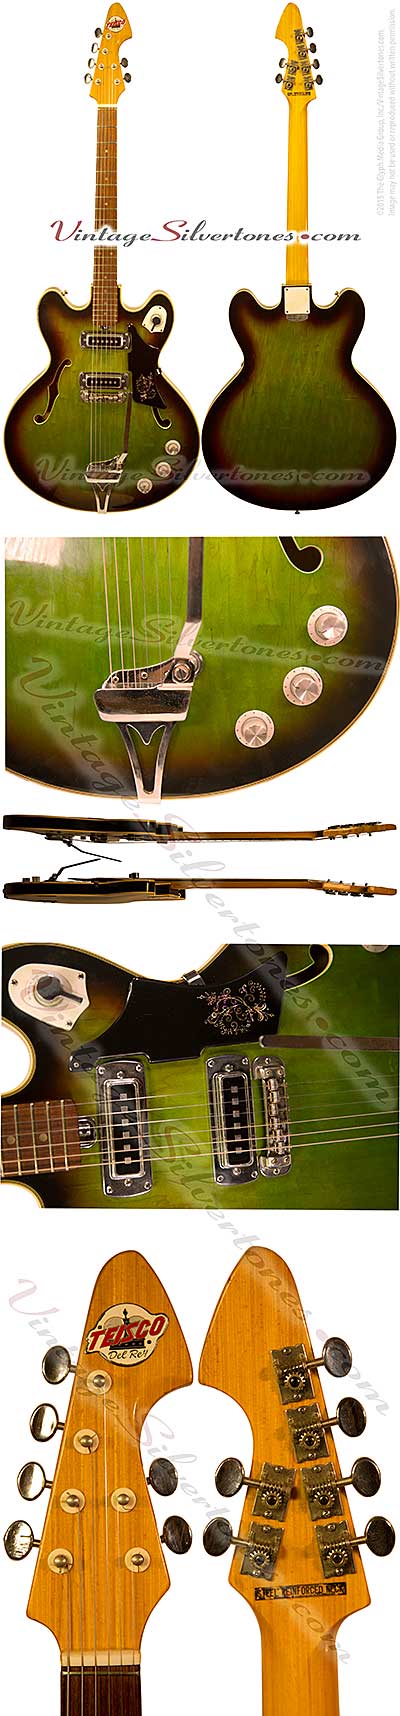 Teisco Del Rey EP-10T hollow body electric guitar 2 pickup, greenburst, double cutaway, made in Japan 1963